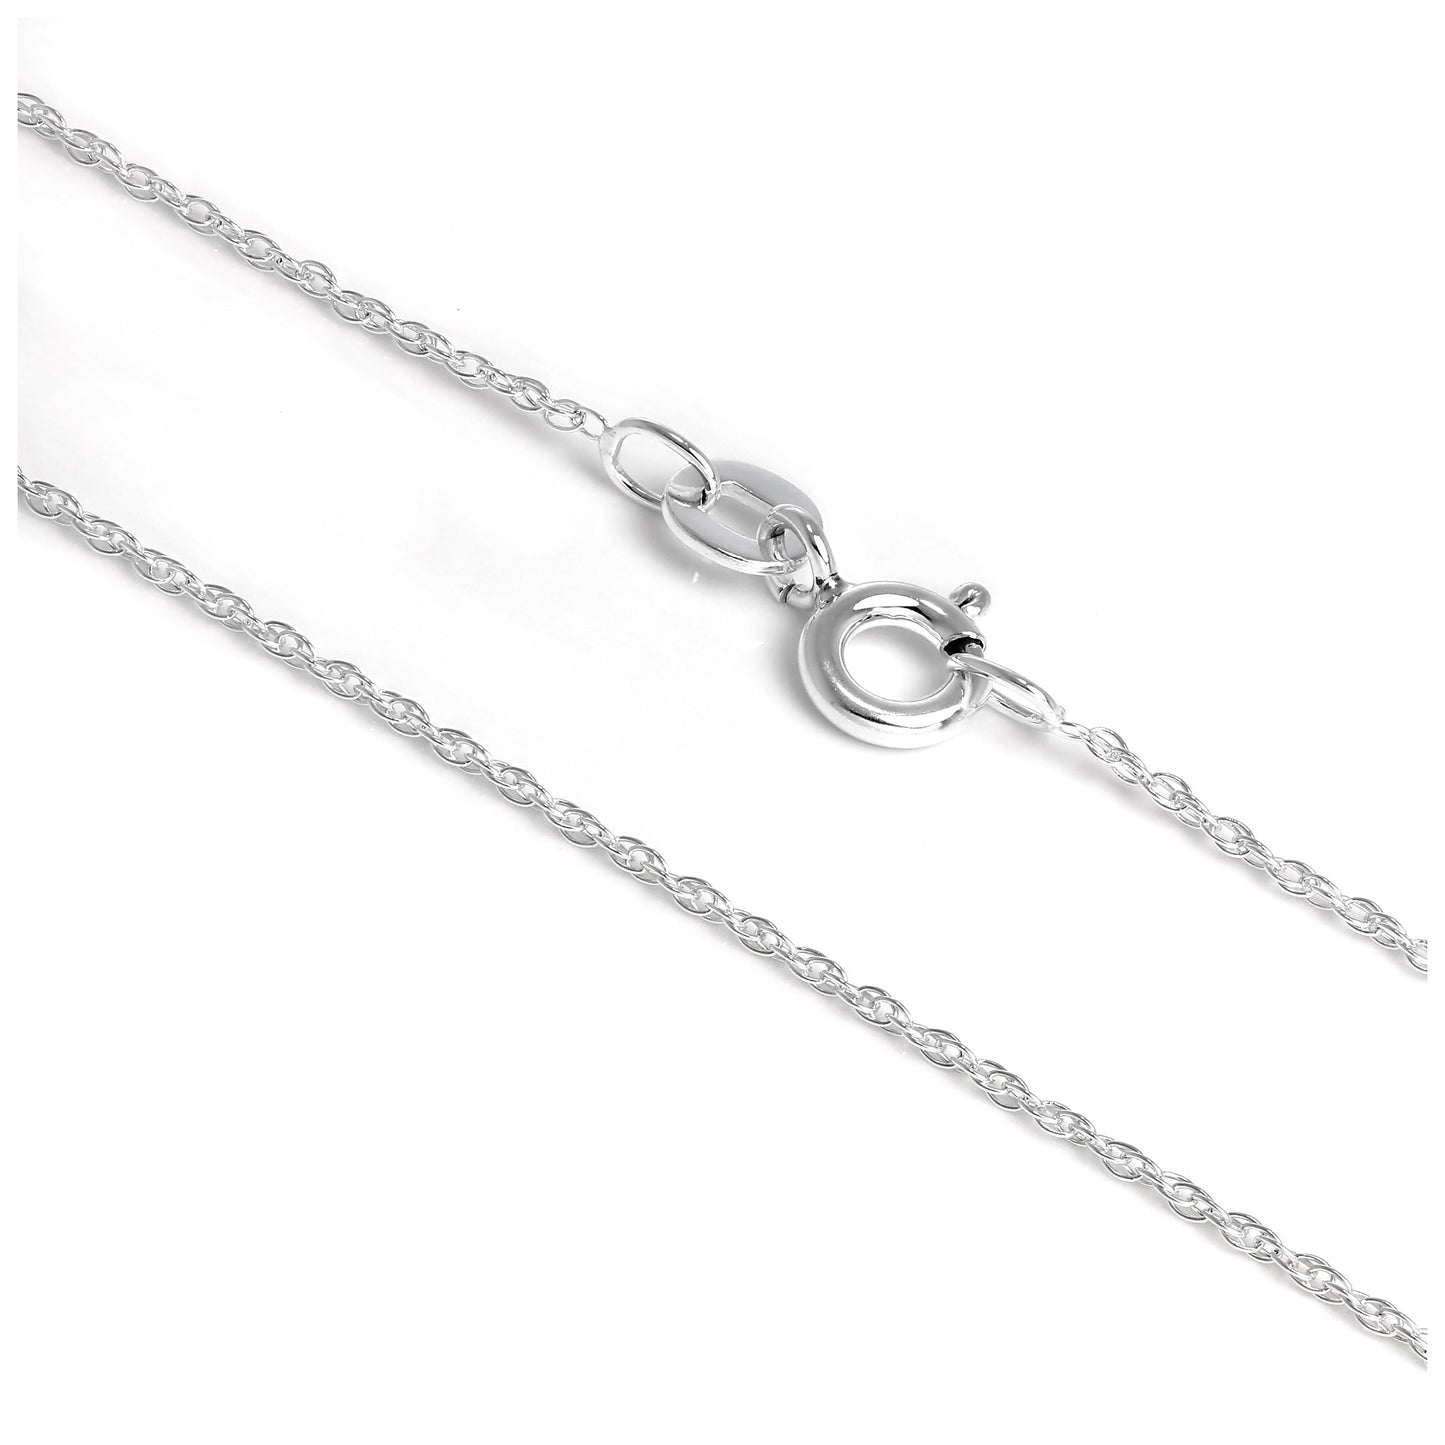 Fine Sterling Silver Prince of Wales Chain Necklace 14 - 28 Inches